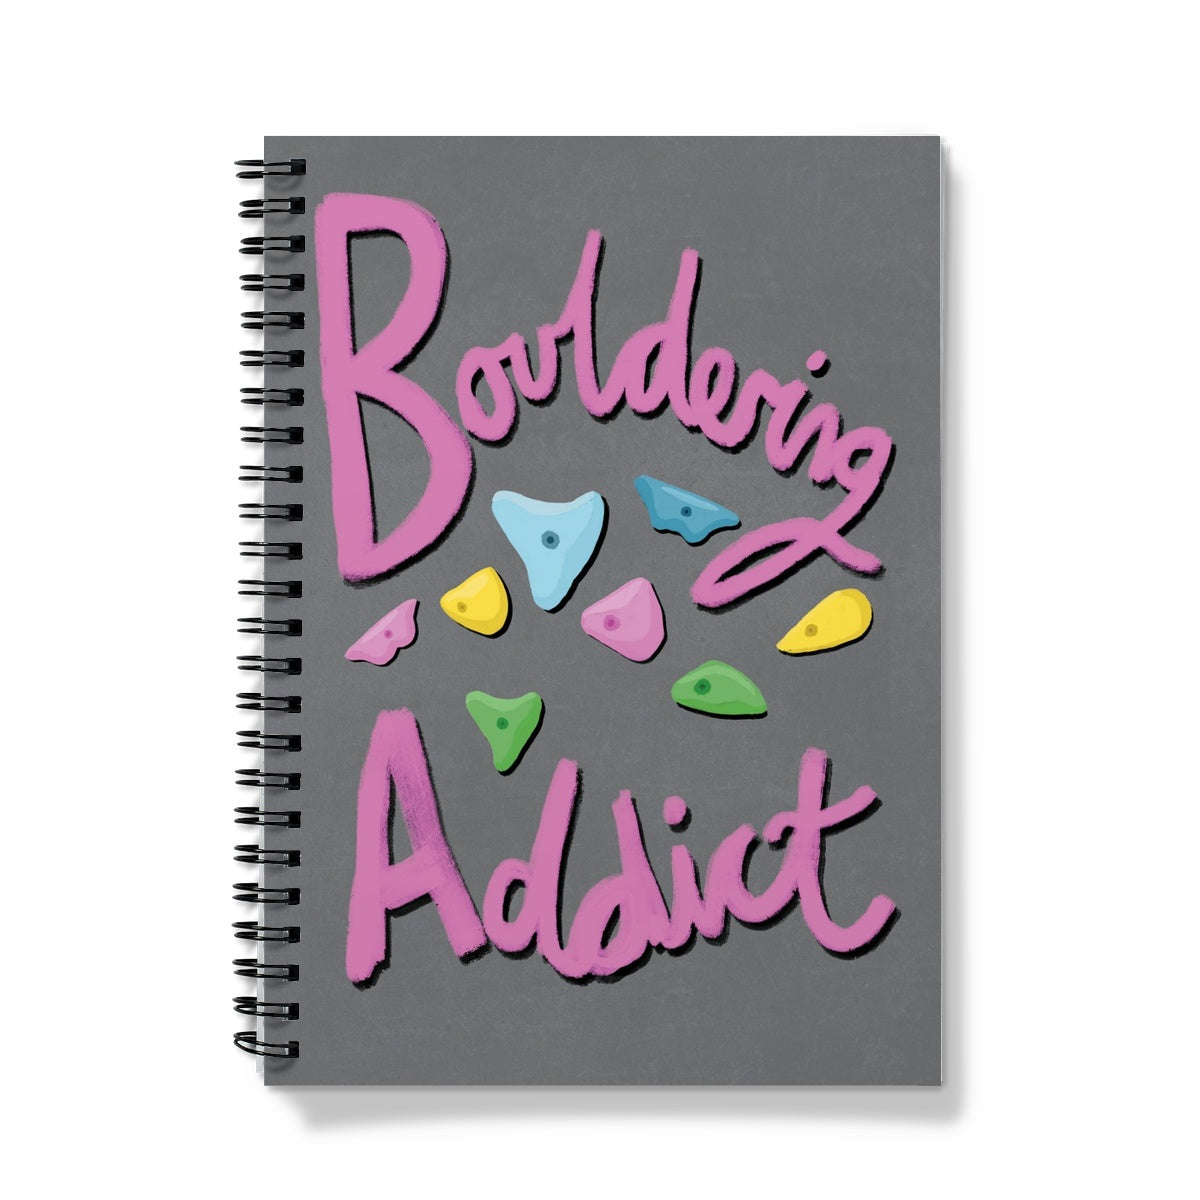 Bouldering Addict - Light Grey and Pink Notebook